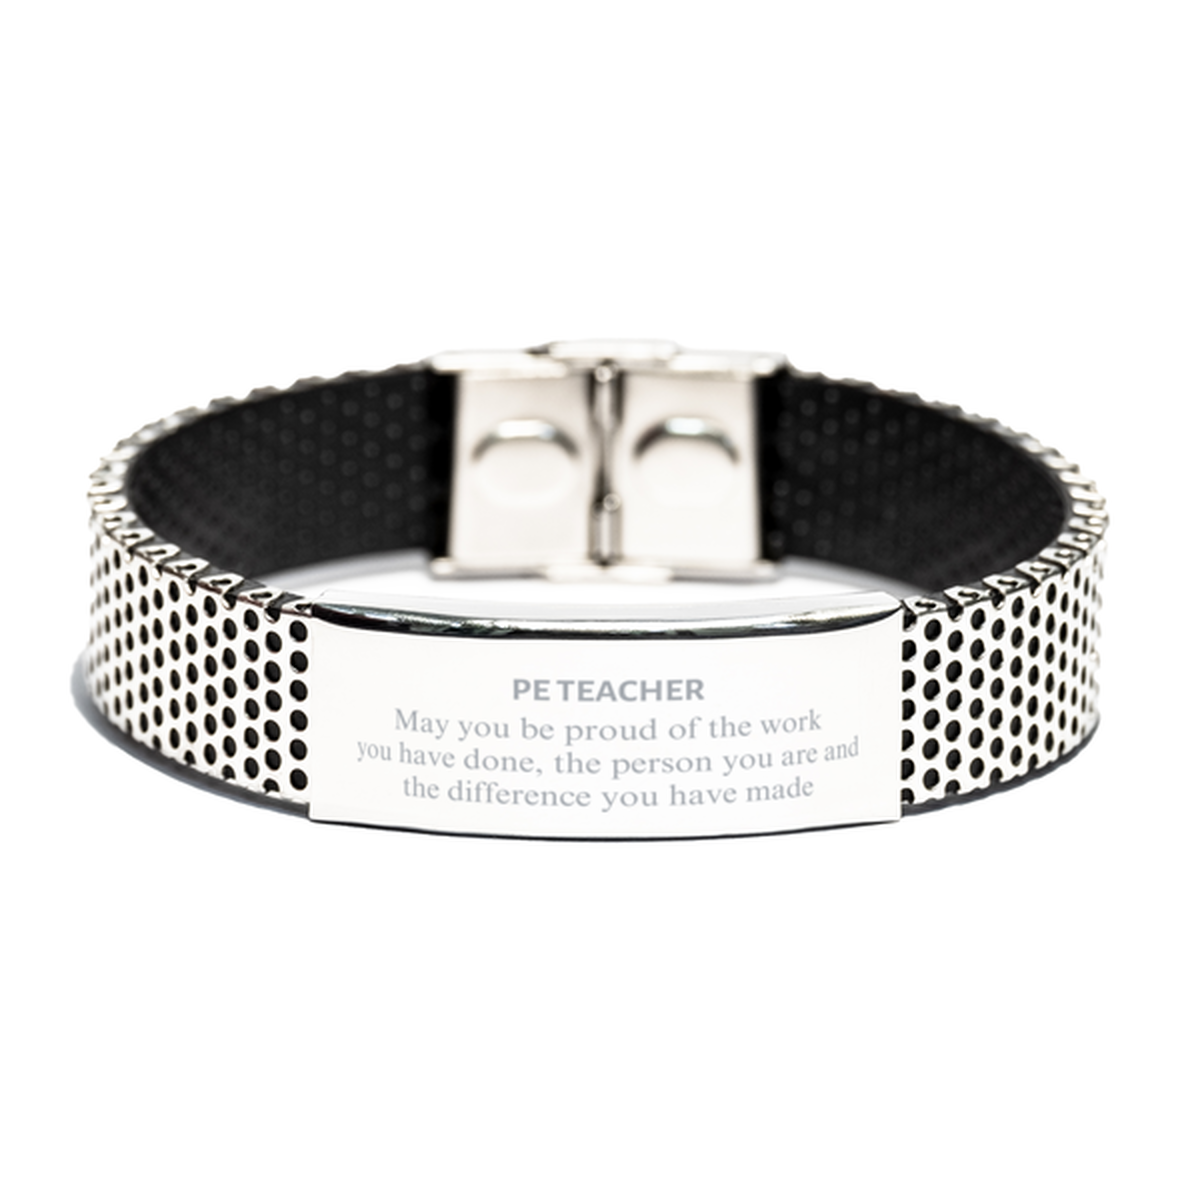 PE Teacher May you be proud of the work you have done, Retirement PE Teacher Stainless Steel Bracelet for Colleague Appreciation Gifts Amazing for PE Teacher